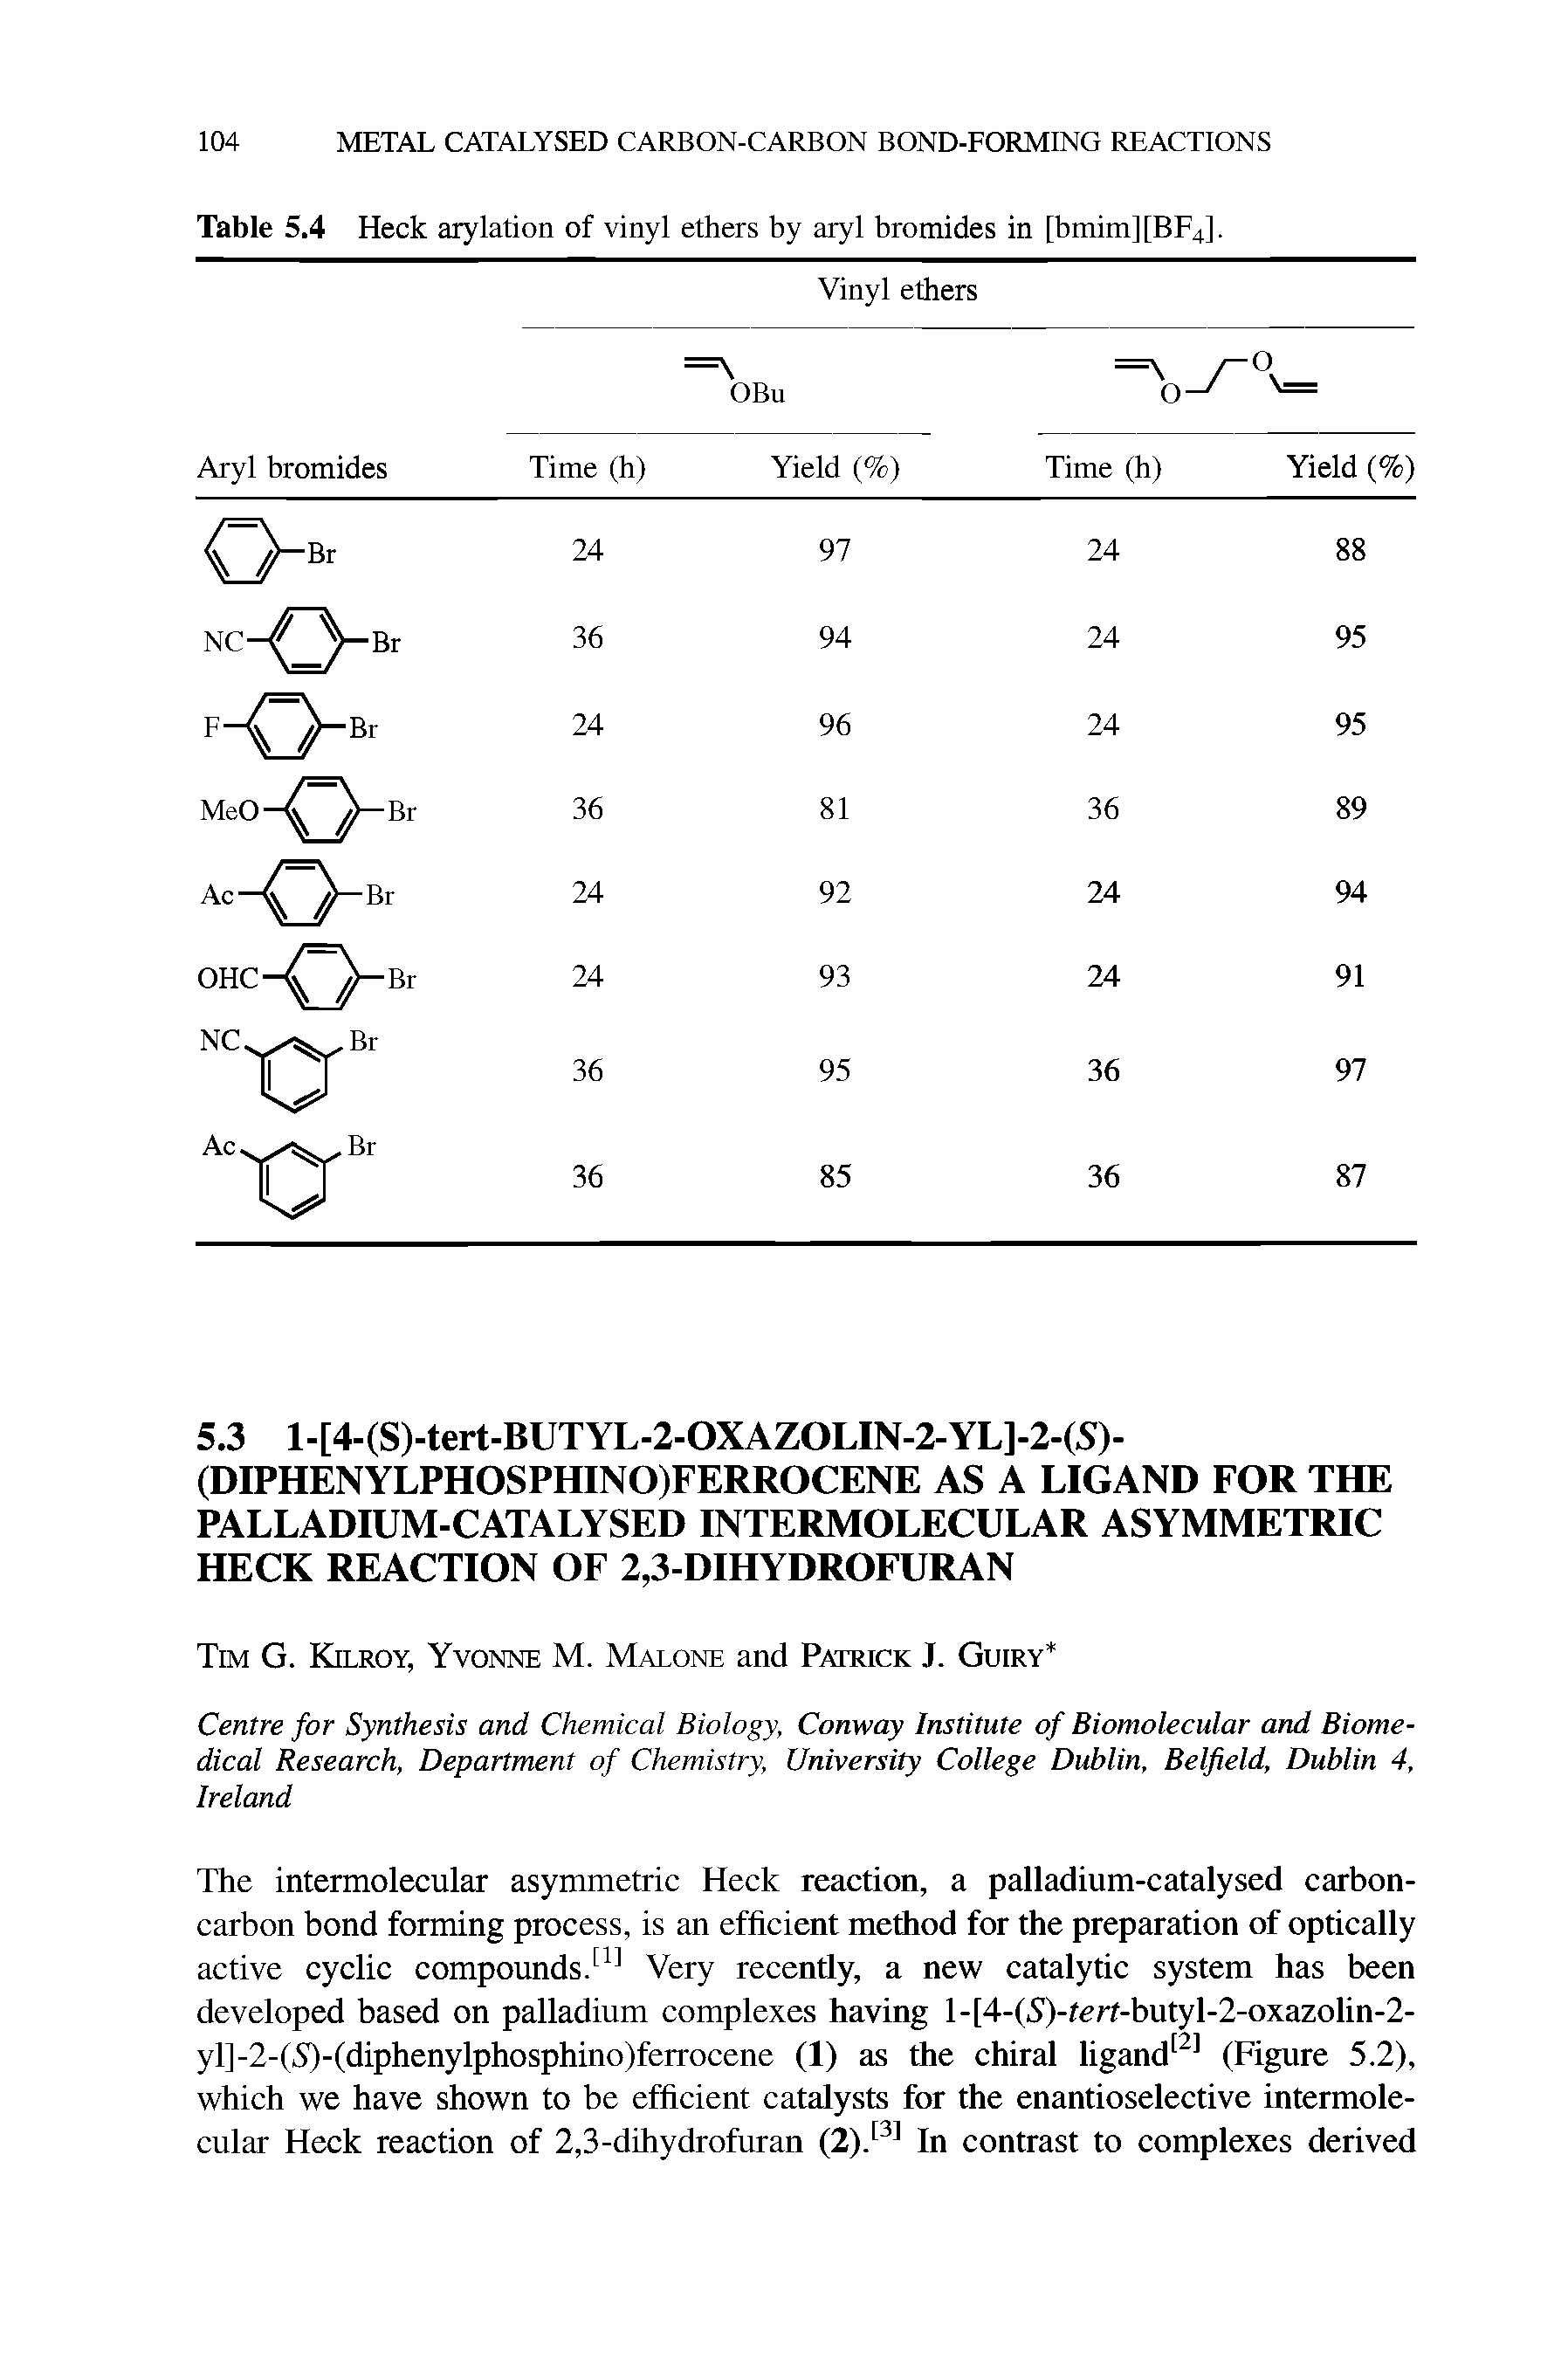 Table 5.4 Heck arylation of vinyl ethers by aryl bromides in [bmim][BF4].